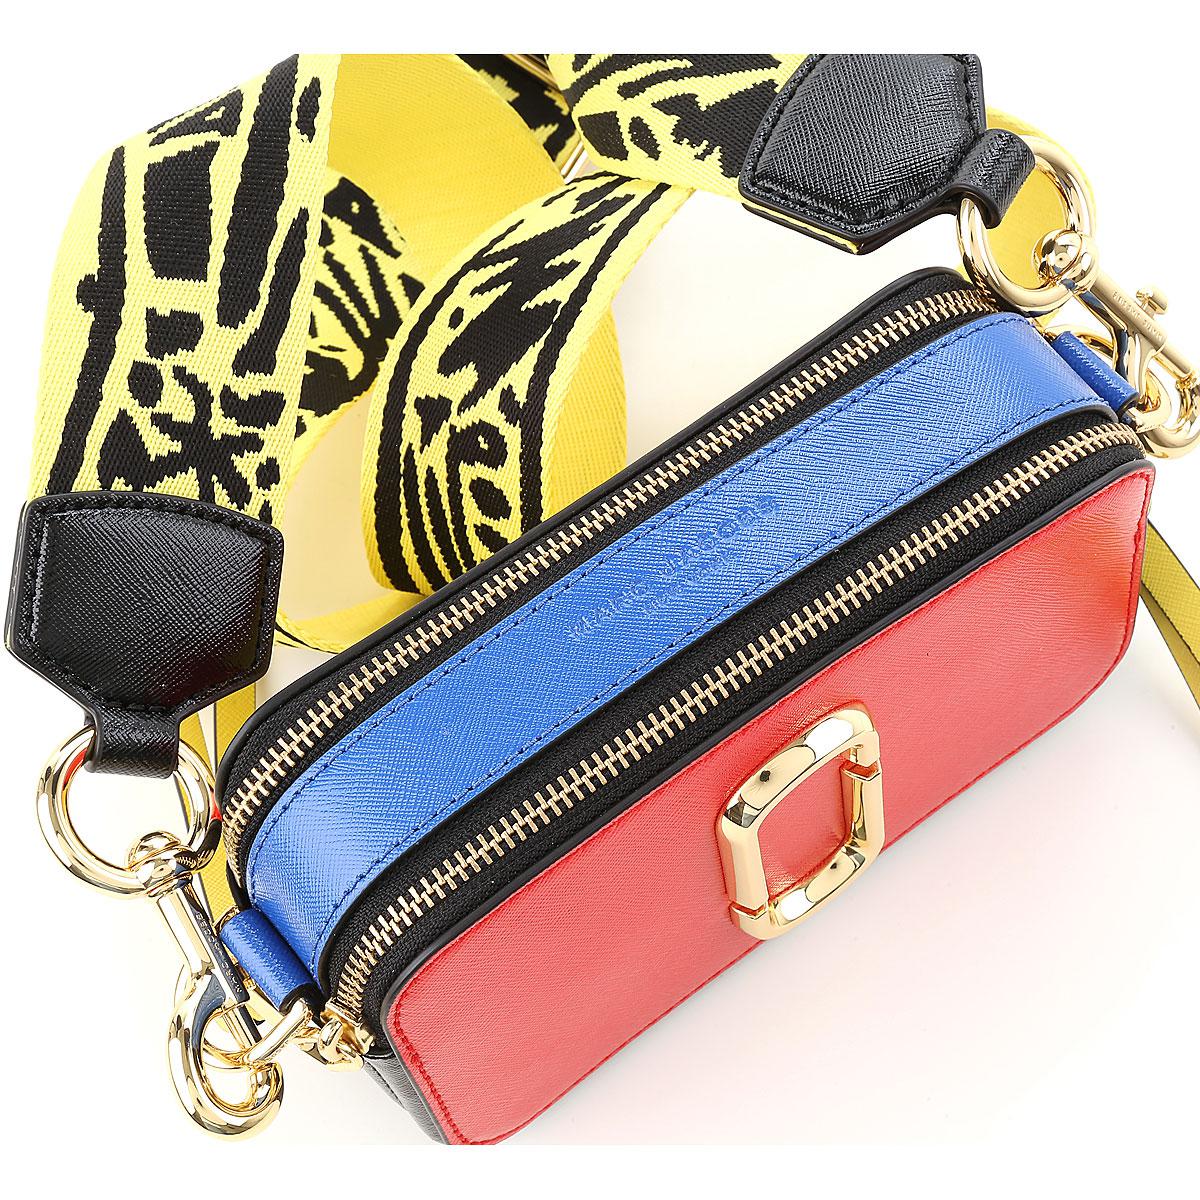 Marc Jacobs Shoulder Bag For Women On Sale in Red - Lyst